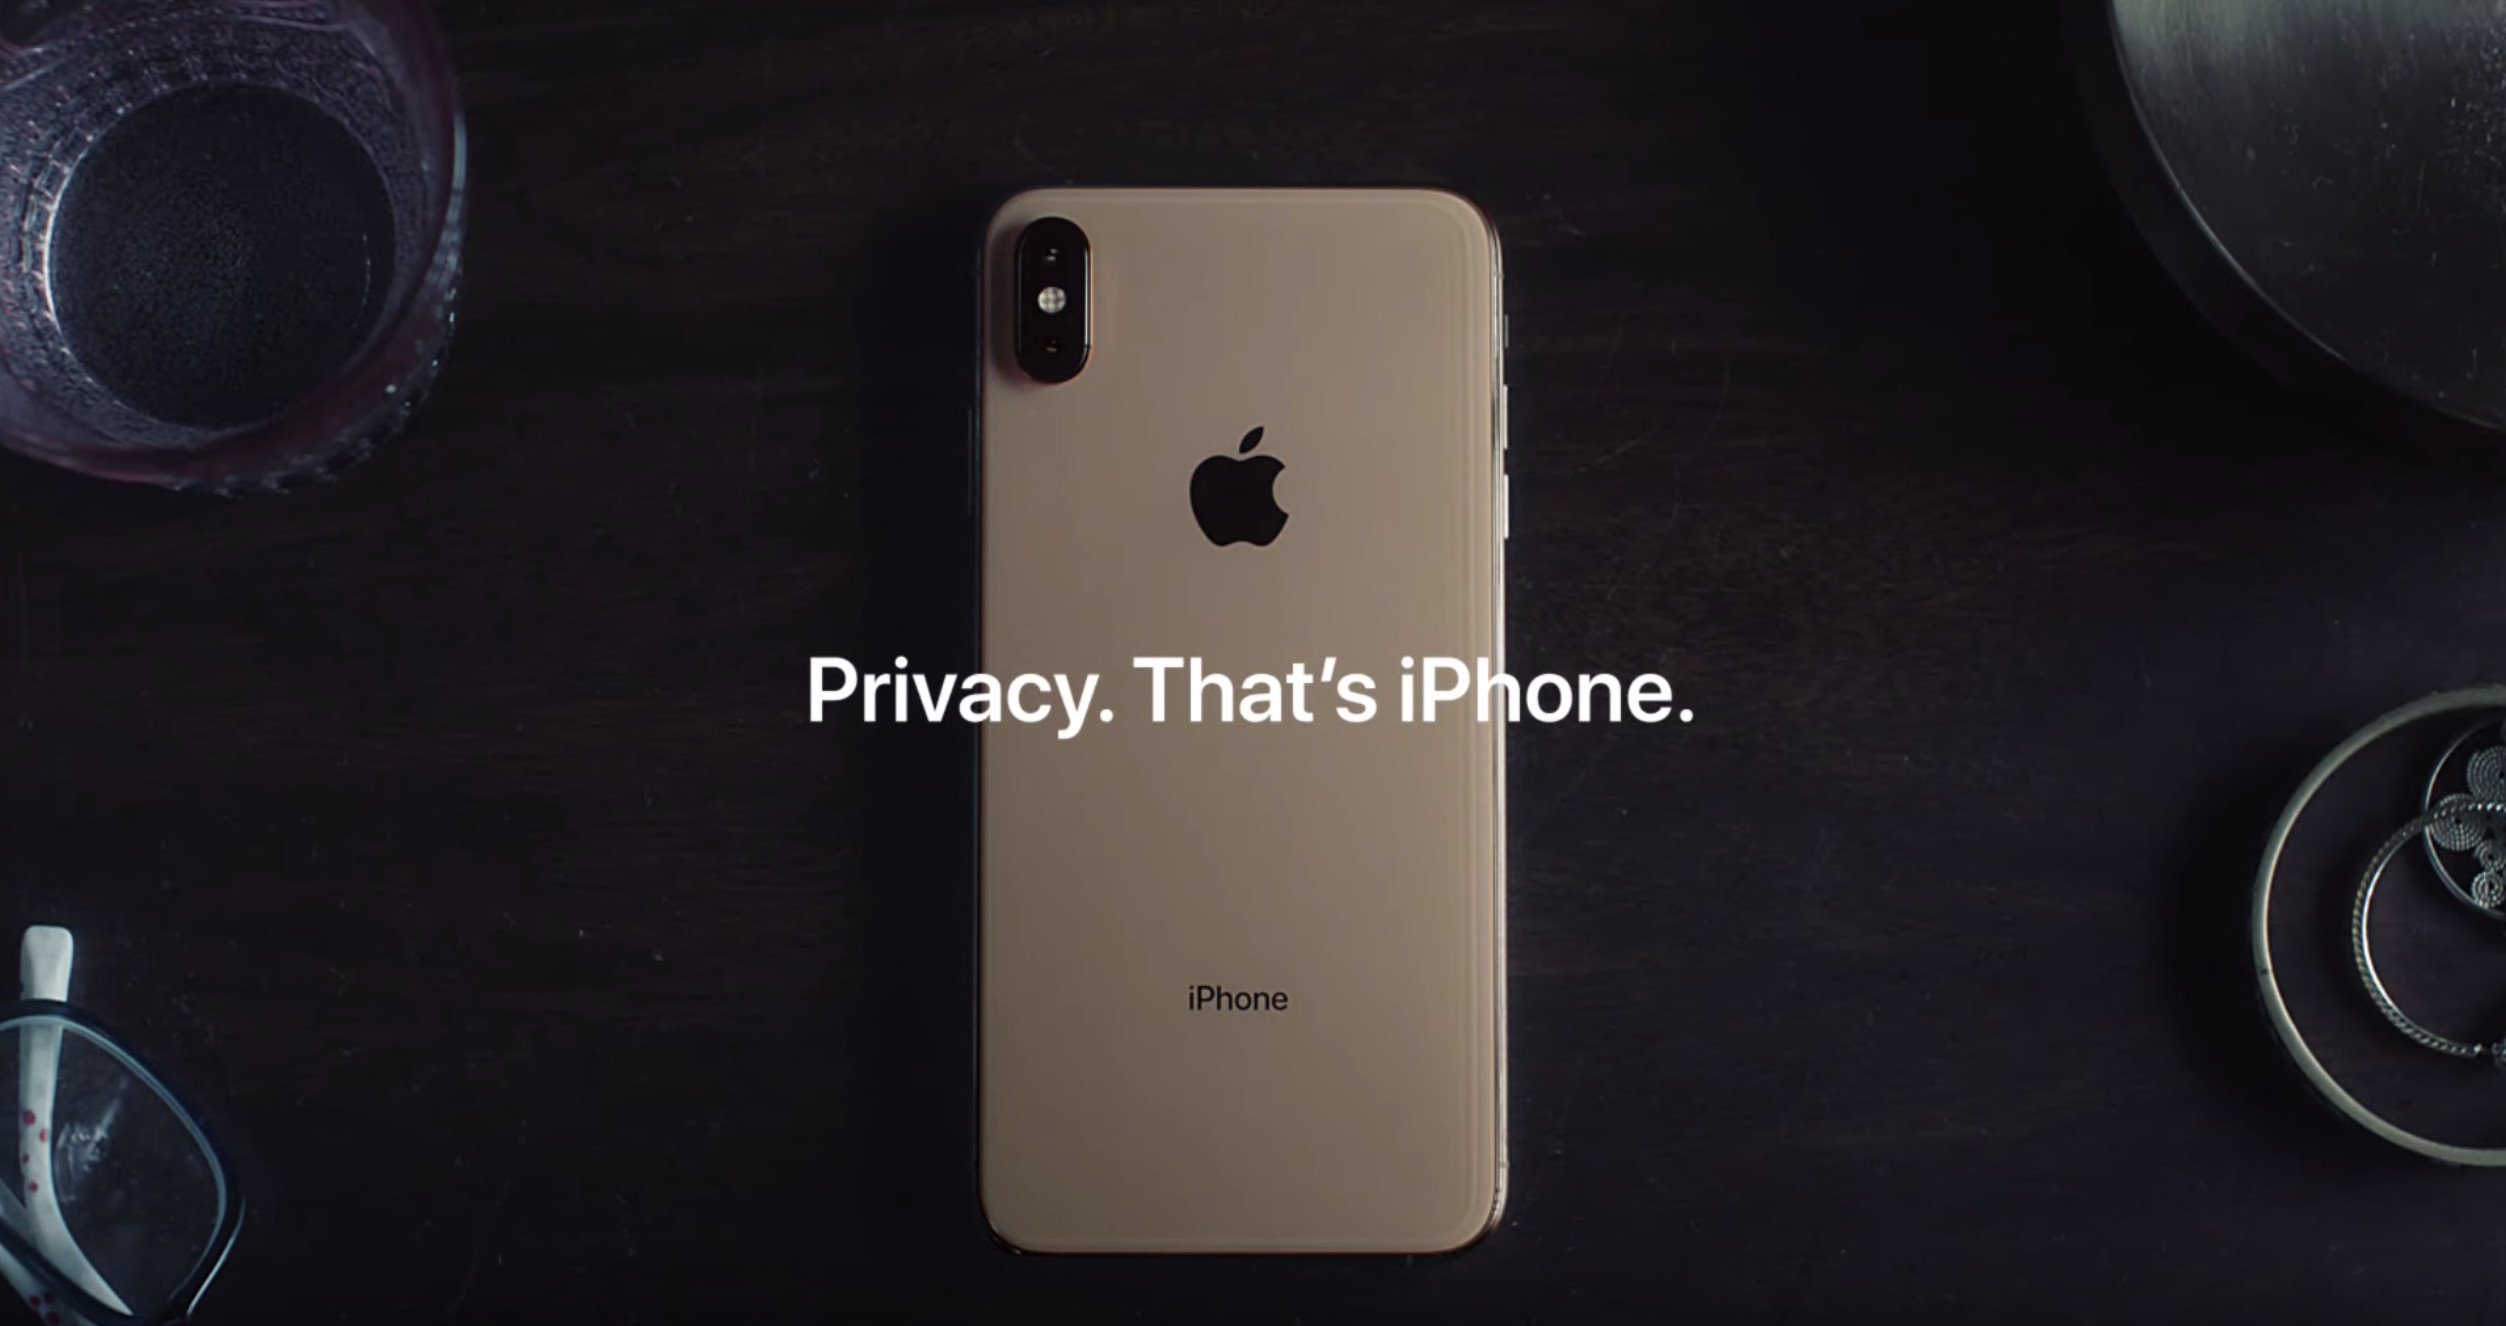 Apple ad that says "Privacy. That's iPhone."